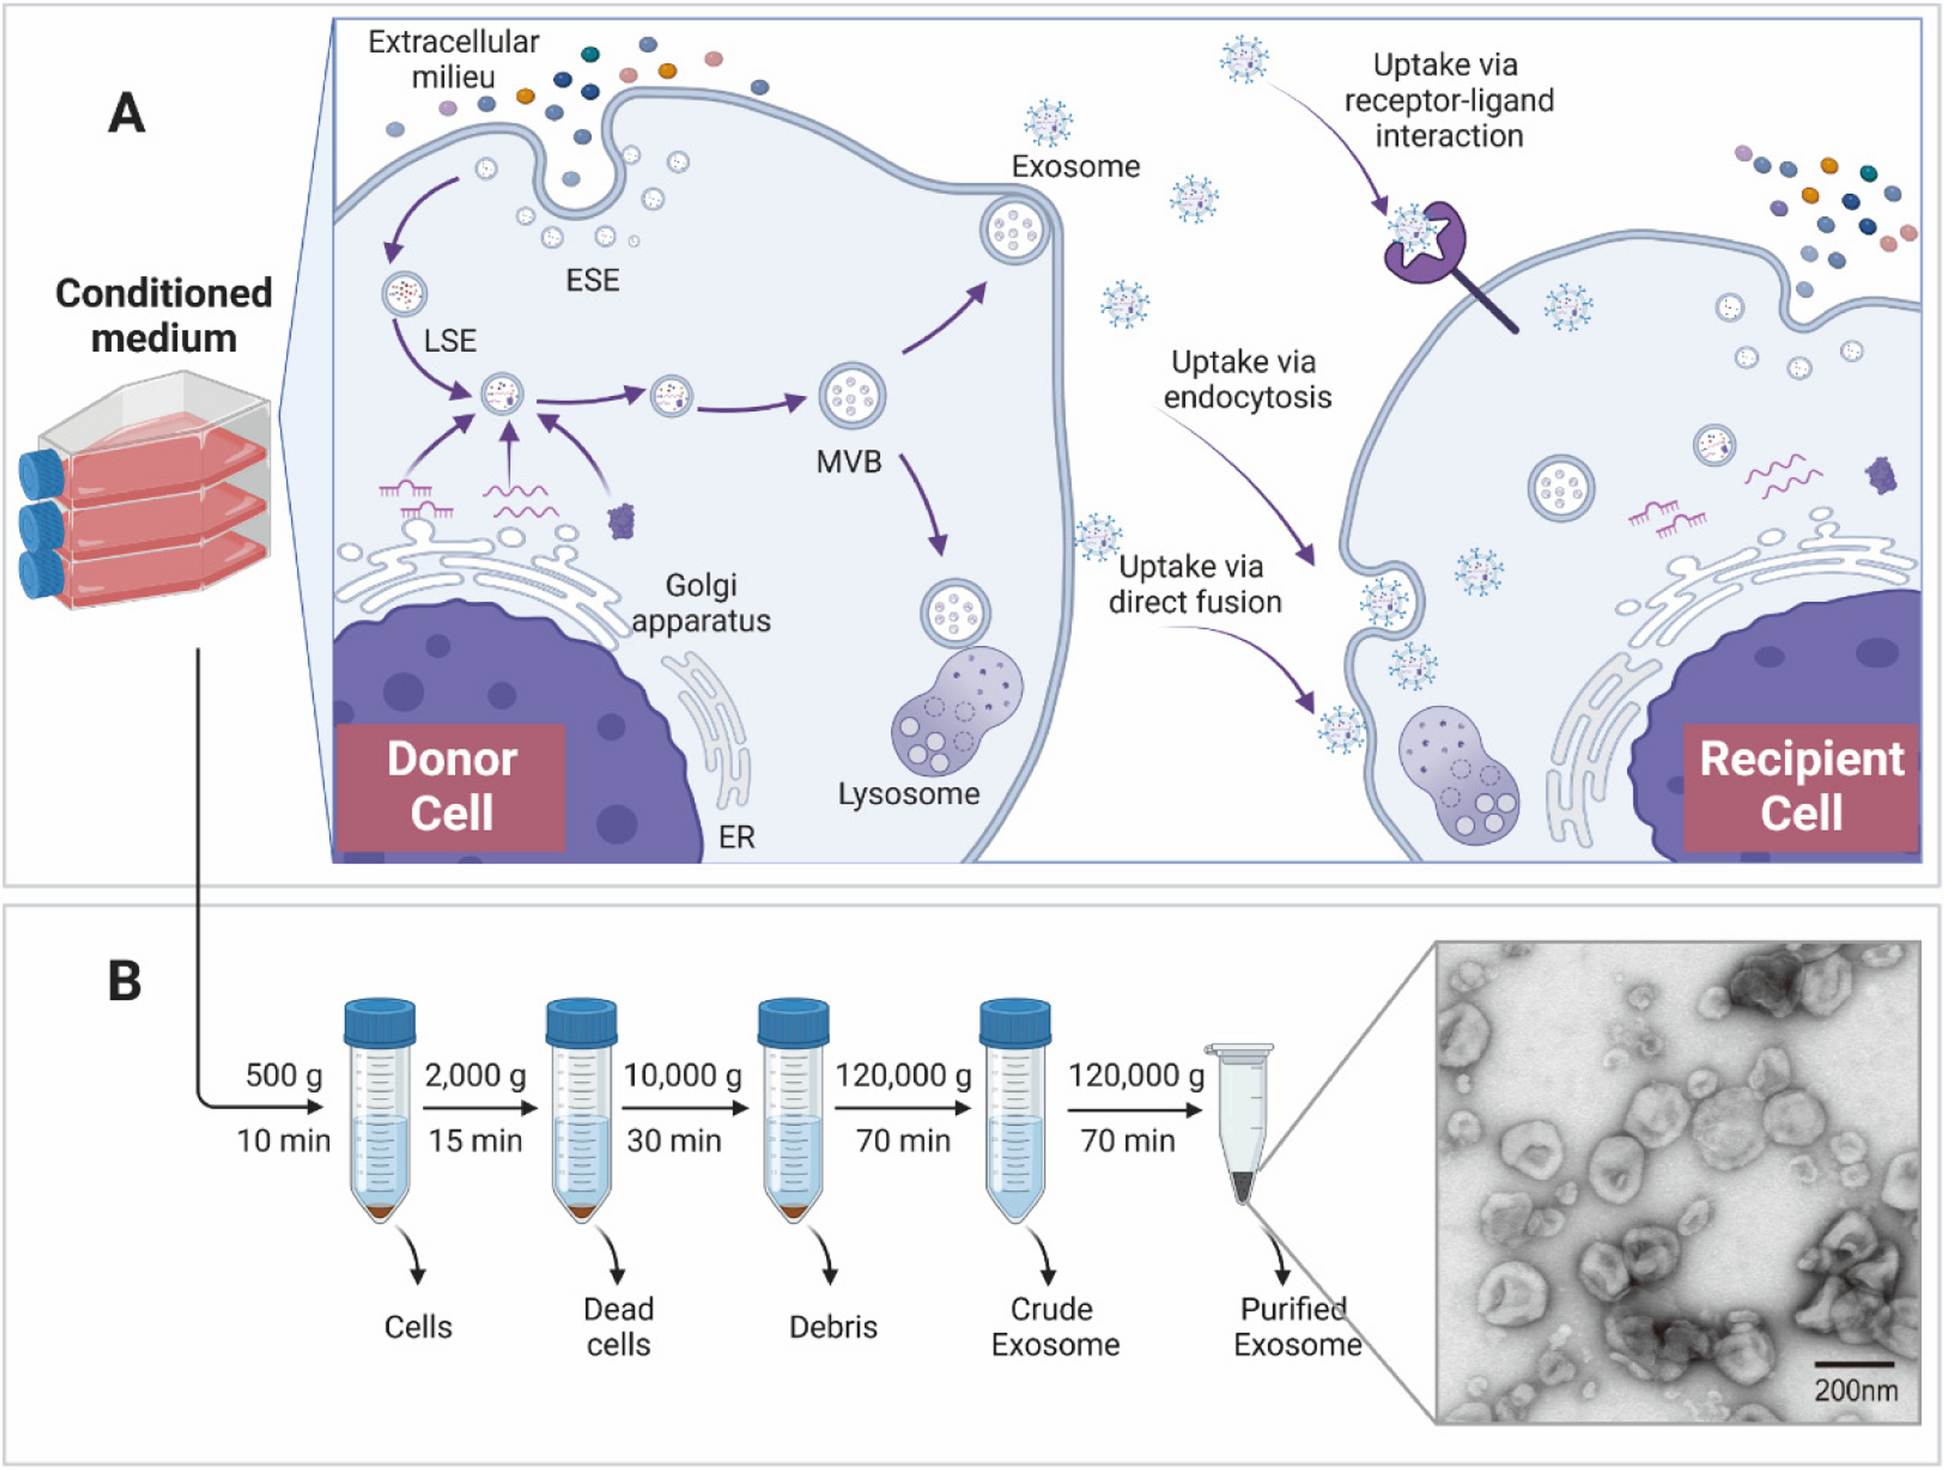 Exosomes derived from programmed cell death: mechanism and biological significance